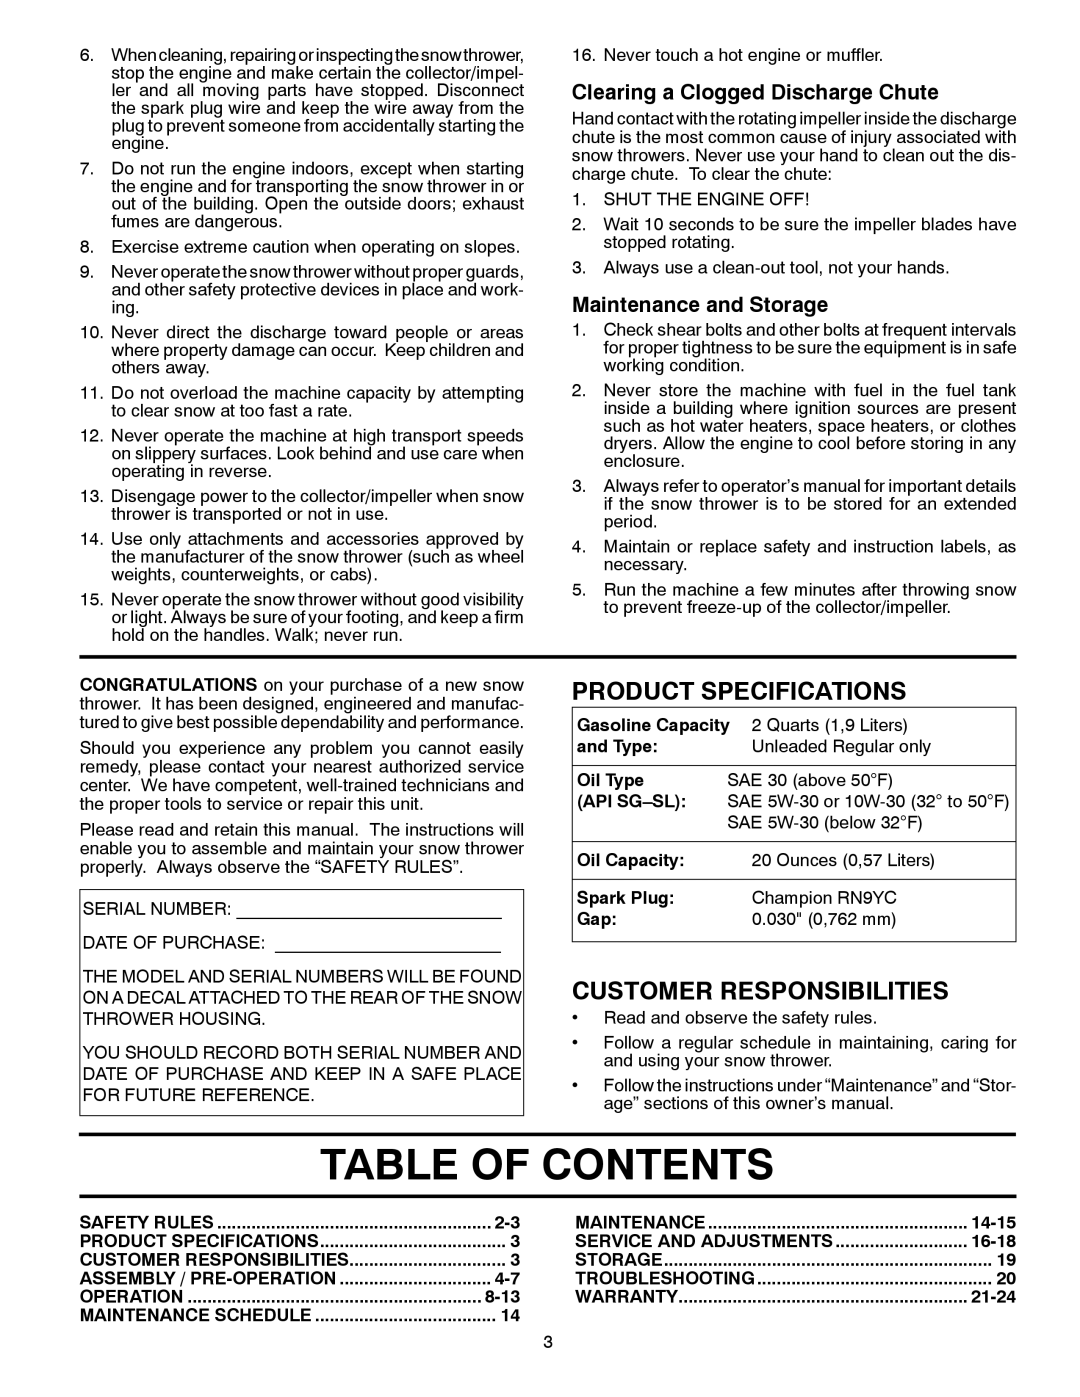 Husqvarna 96193005400 Table Of Contents, Clearing a Clogged Discharge Chute, Maintenance and Storage, and Type, Oil Type 